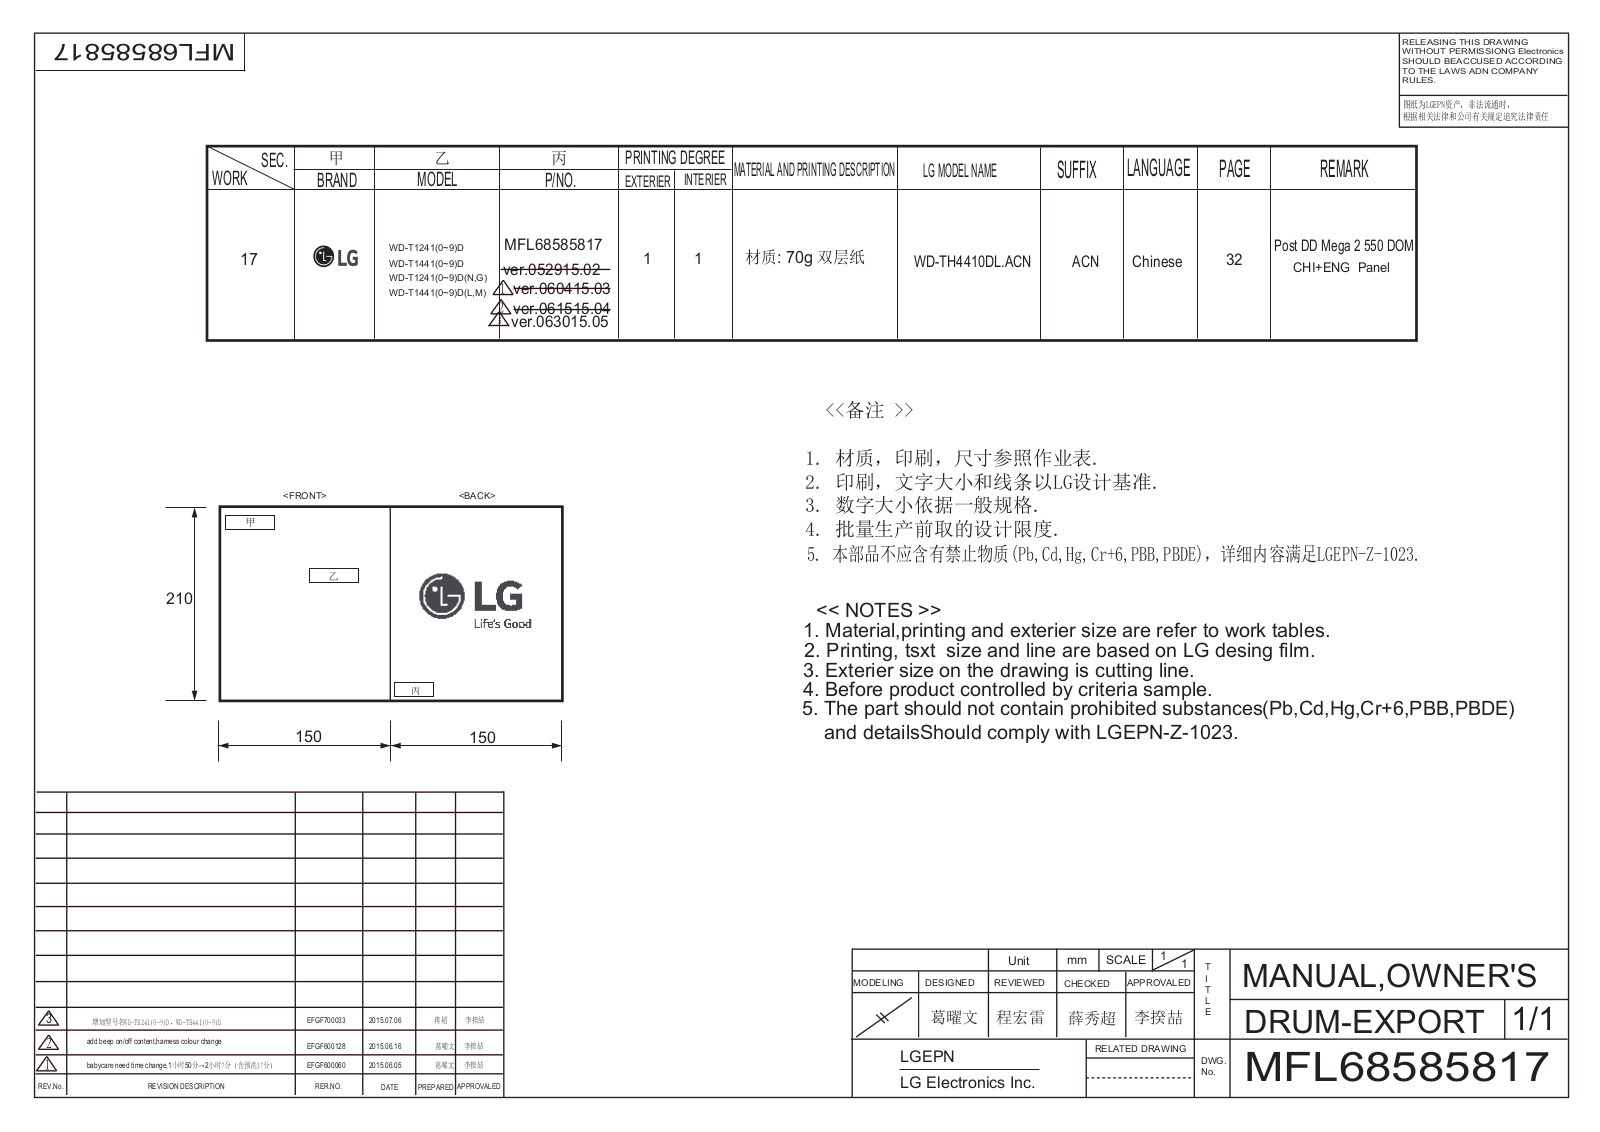 LG WD-TH4417D, WD-TH4410DN, WD-TH2417D1 Users guide